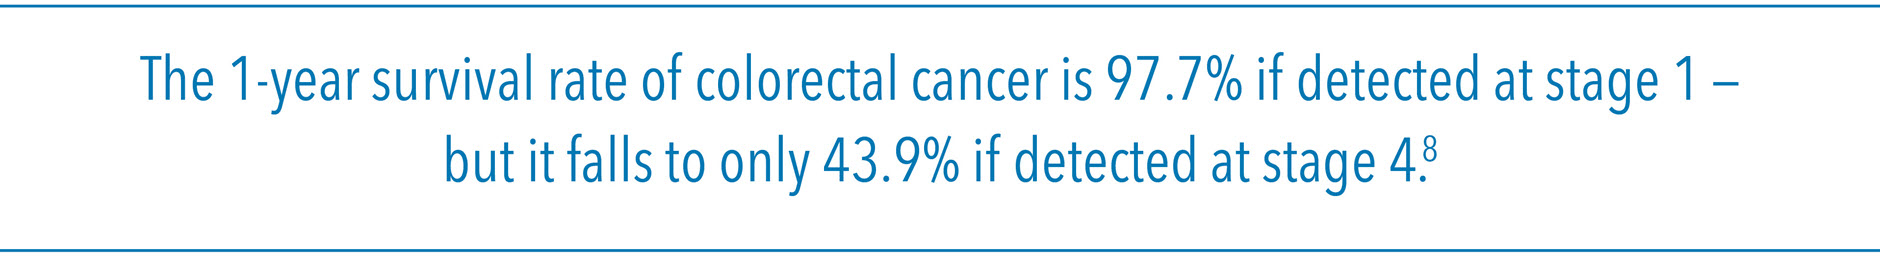 The 1-year survival rate of colorectal cancer is 97.7% if detected at stage 1 — but it falls to only 43.9% if detected at stage 4.